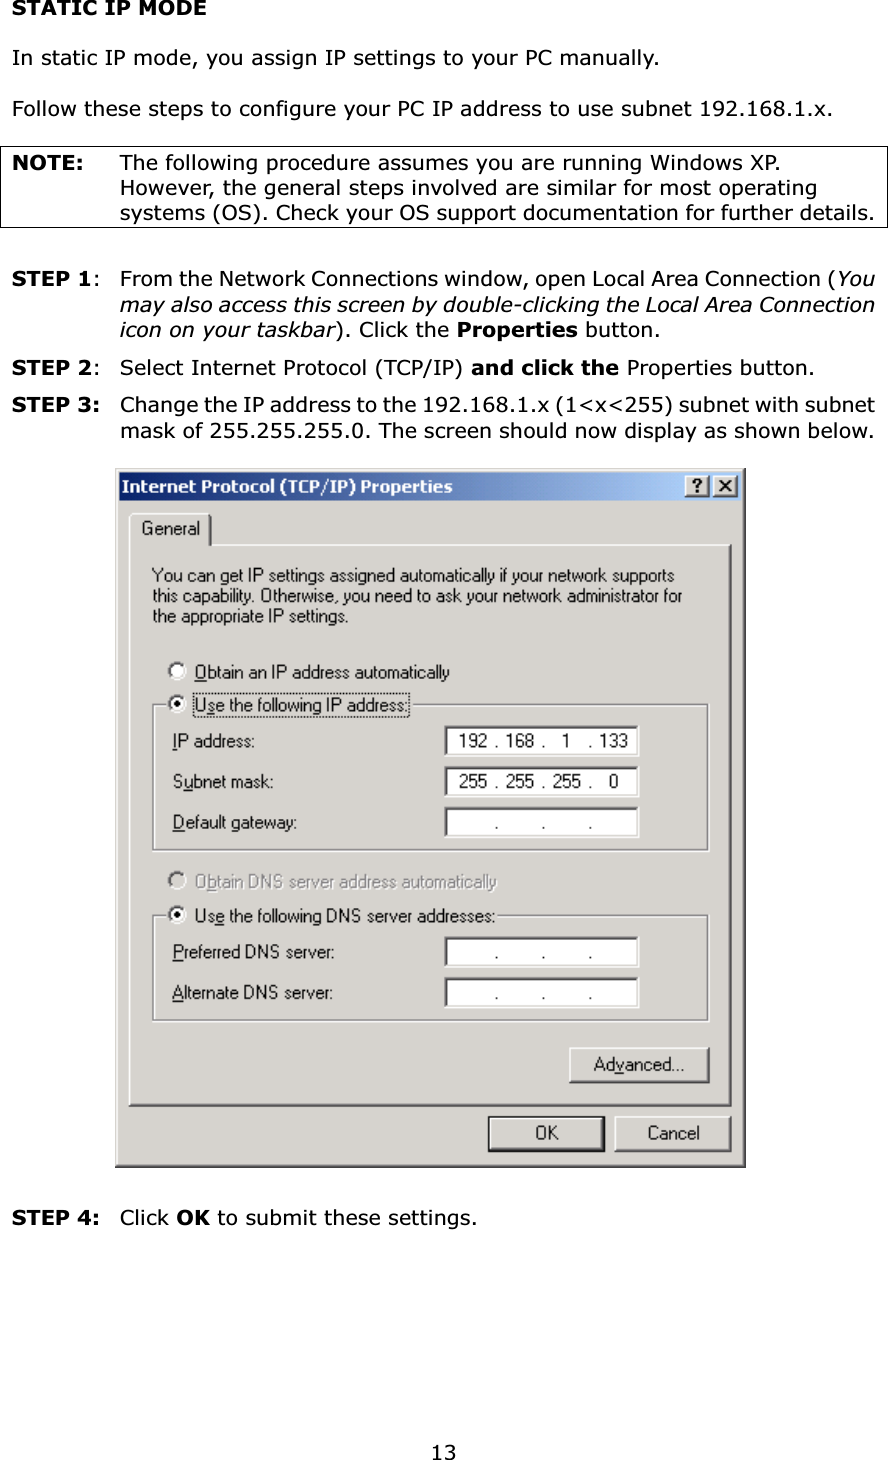 13STATIC IP MODEIn static IP mode, you assign IP settings to your PC manually.Follow these steps to configure your PC IP address to use subnet 192.168.1.x.NOTE: The following procedure assumes you are running Windows XP.   However, the general steps involved are similar for most operating systems (OS). Check your OS support documentation for further details.STEP 1: From the Network Connections window, open Local Area Connection (You may also access this screen by double-clicking the Local Area Connection icon on your taskbar). Click the Properties button.STEP 2: Select Internet Protocol (TCP/IP) and click the Properties button.STEP 3: Change the IP address to the 192.168.1.x (1&lt;x&lt;255) subnet with subnet mask of 255.255.255.0. The screen should now display as shown below.STEP 4:  Click OK to submit these settings.